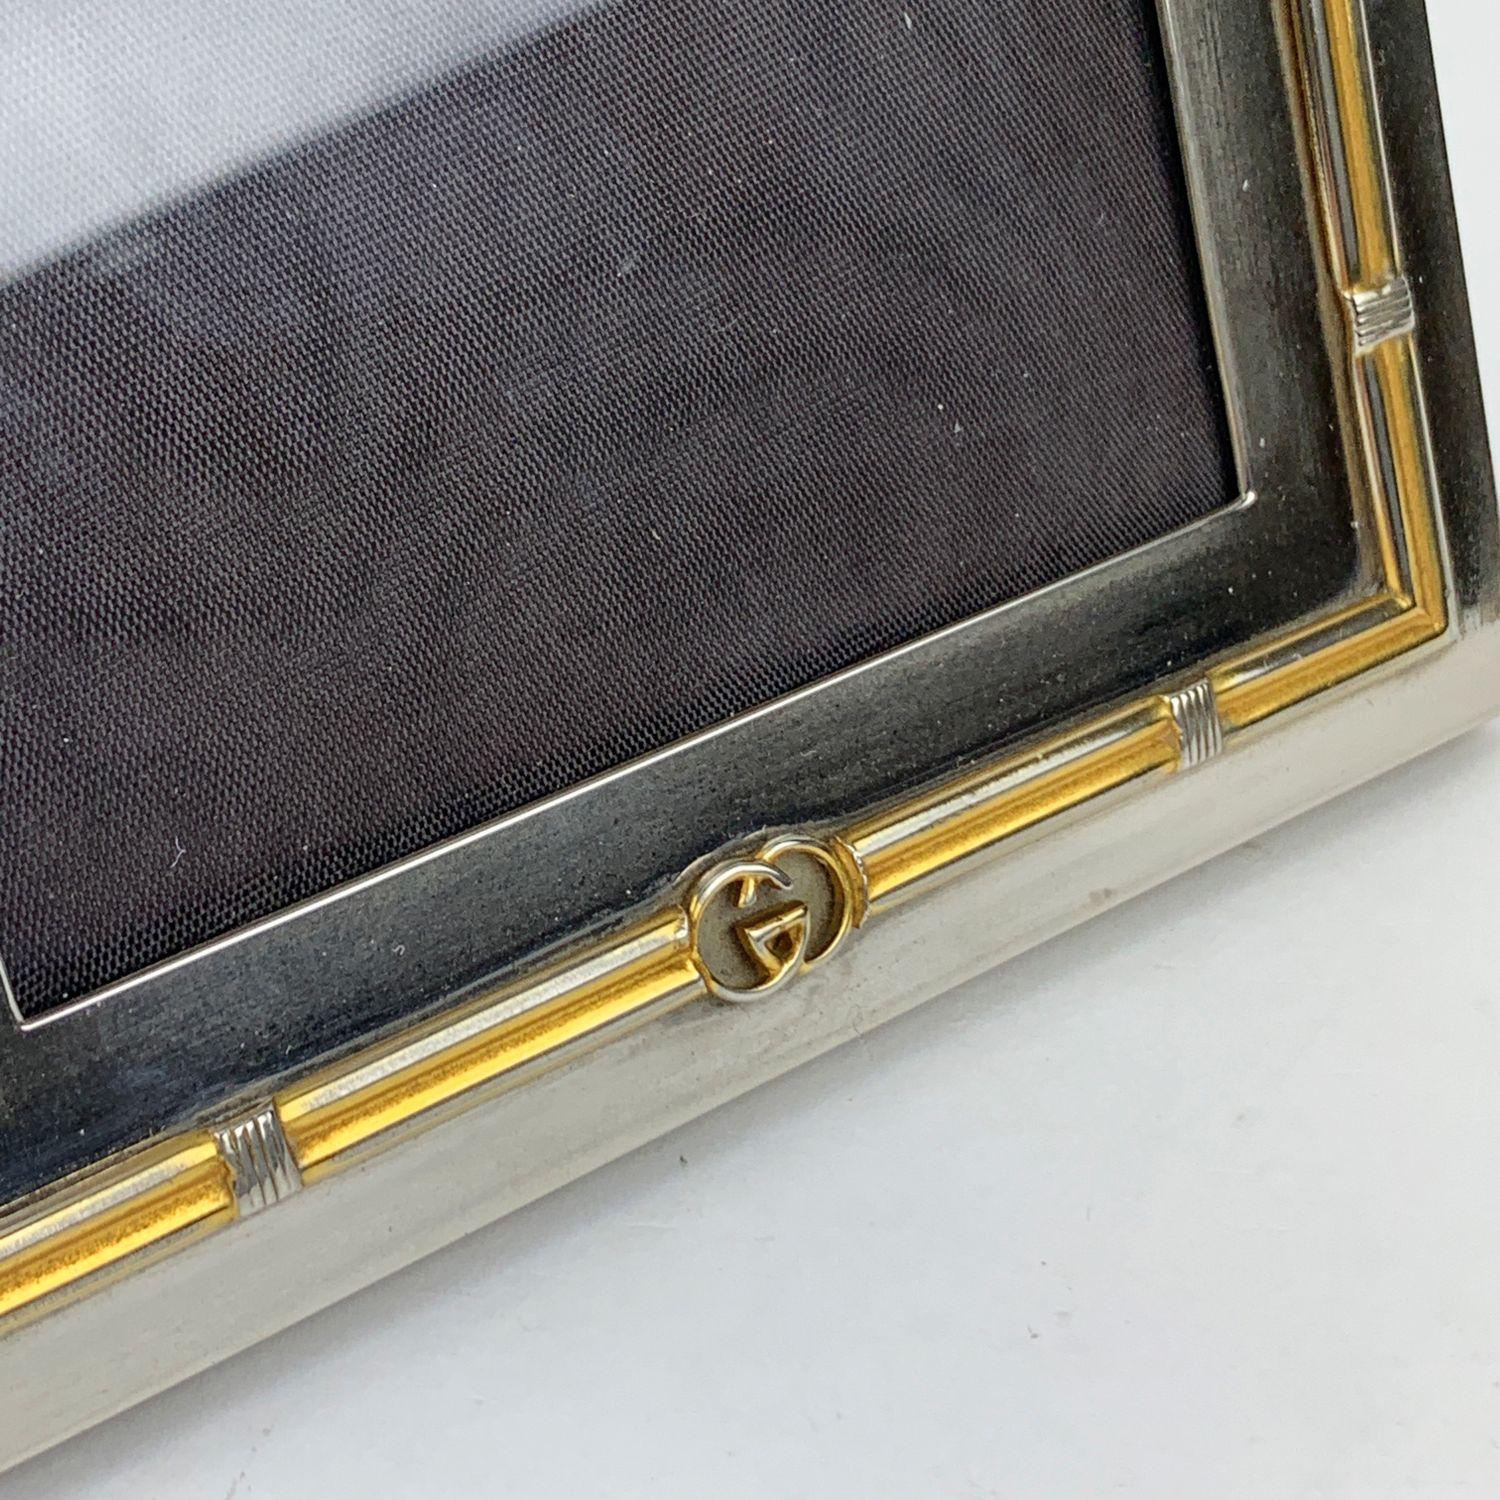 Vintage silver metal desk photo frame by Gucci. GG - GUCCI logo on the front. Square-shaped. Clear glass on the front and Wood on the back. ' Gucci - Italy' engraved on the upper border. Measurements (HxL):5.5 x 5.5 inches -14 x 14 cm. For approx 4